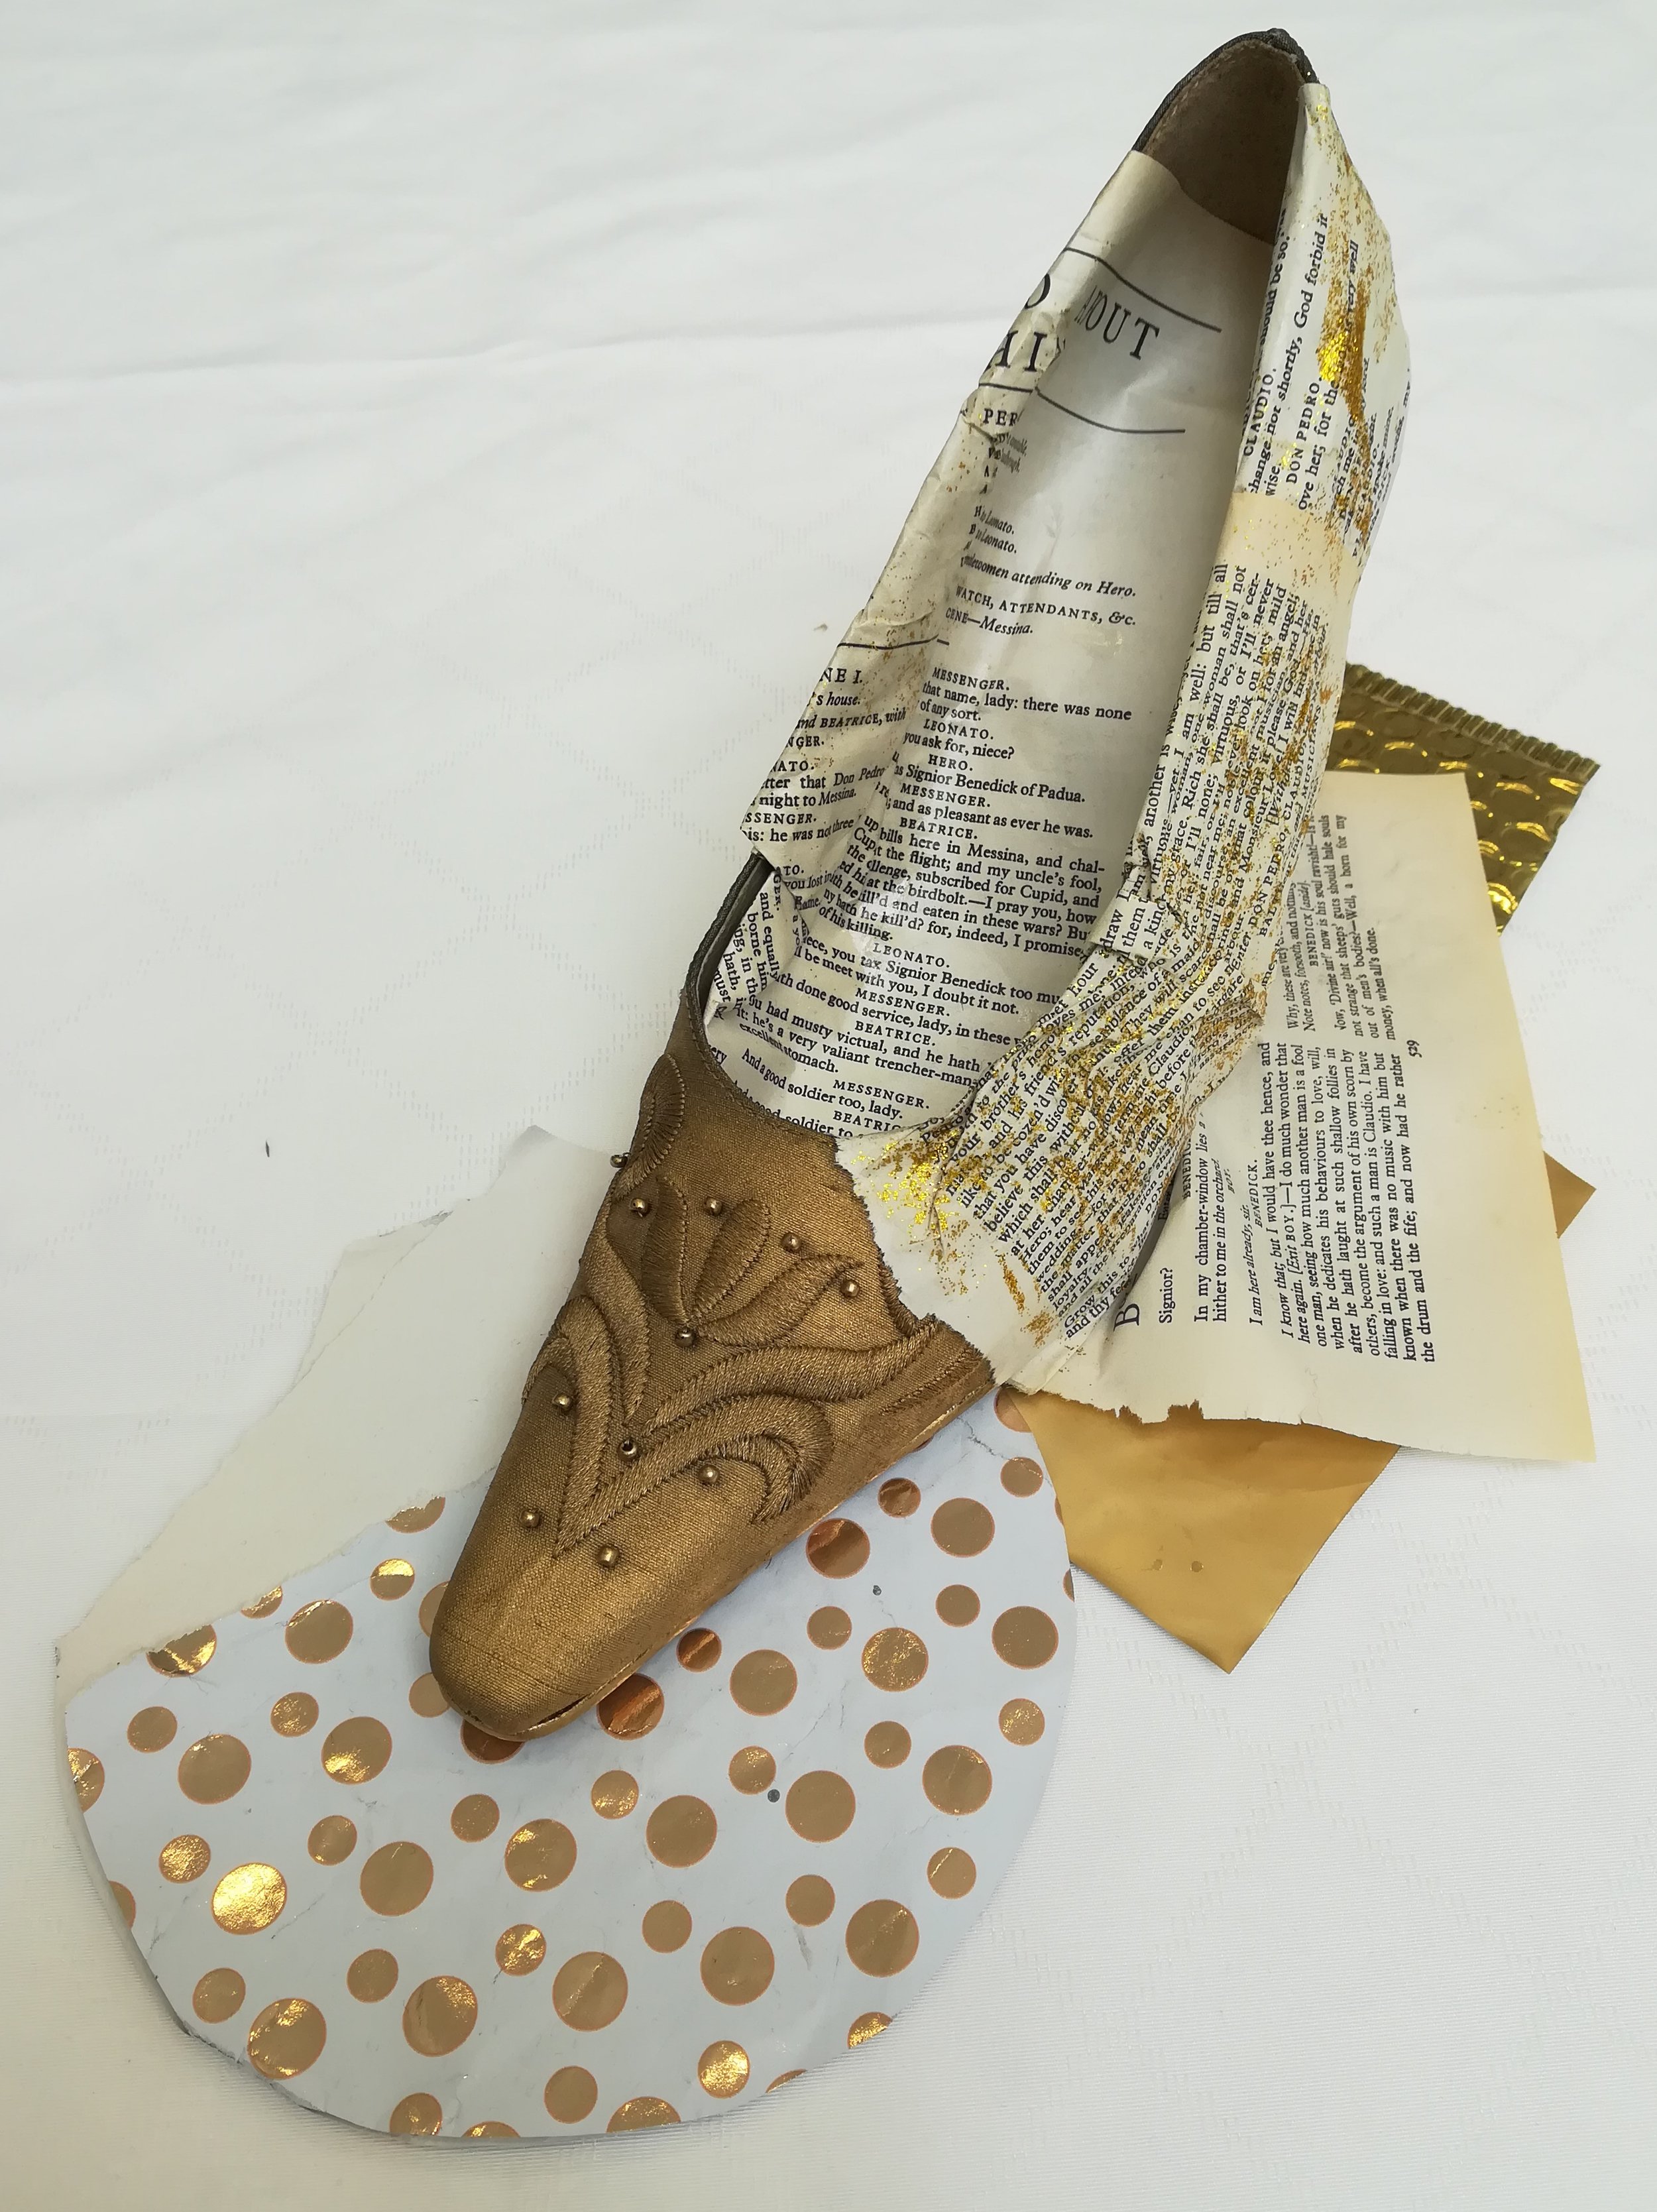 Golden Liberty Shoe, Much Ado About Nothing / Shoe, theatre play, paper, golden spray / 16 x 13 x 40 cm / 2021